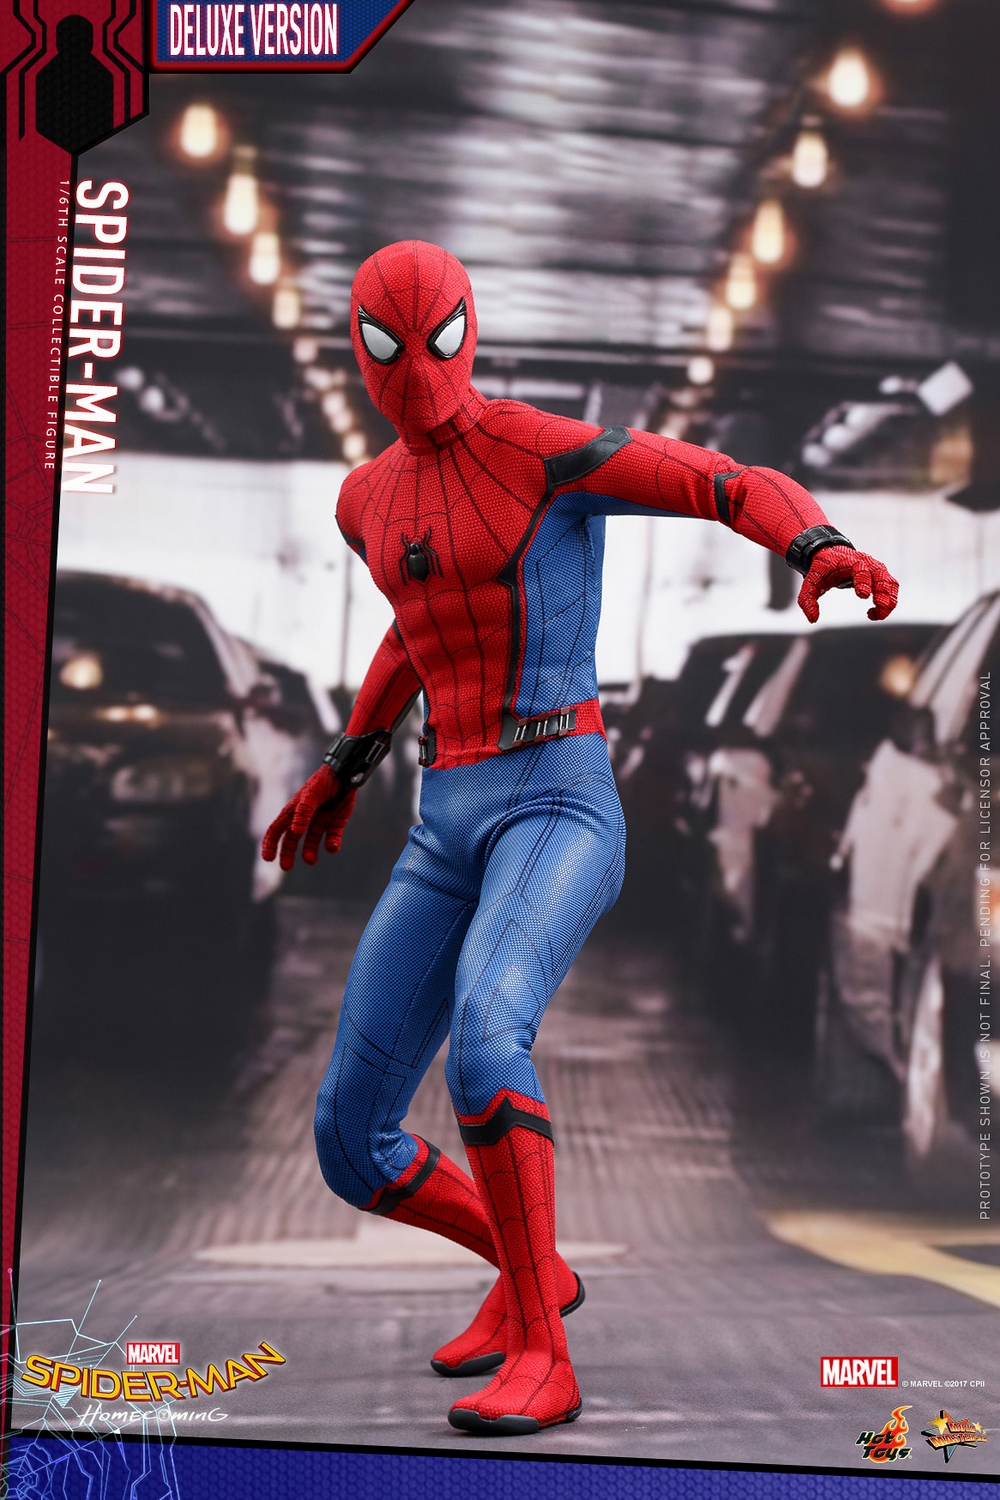 Hot-Toys-MMS426-Spider-Man-Homecoming-Deluxe-009.jpg